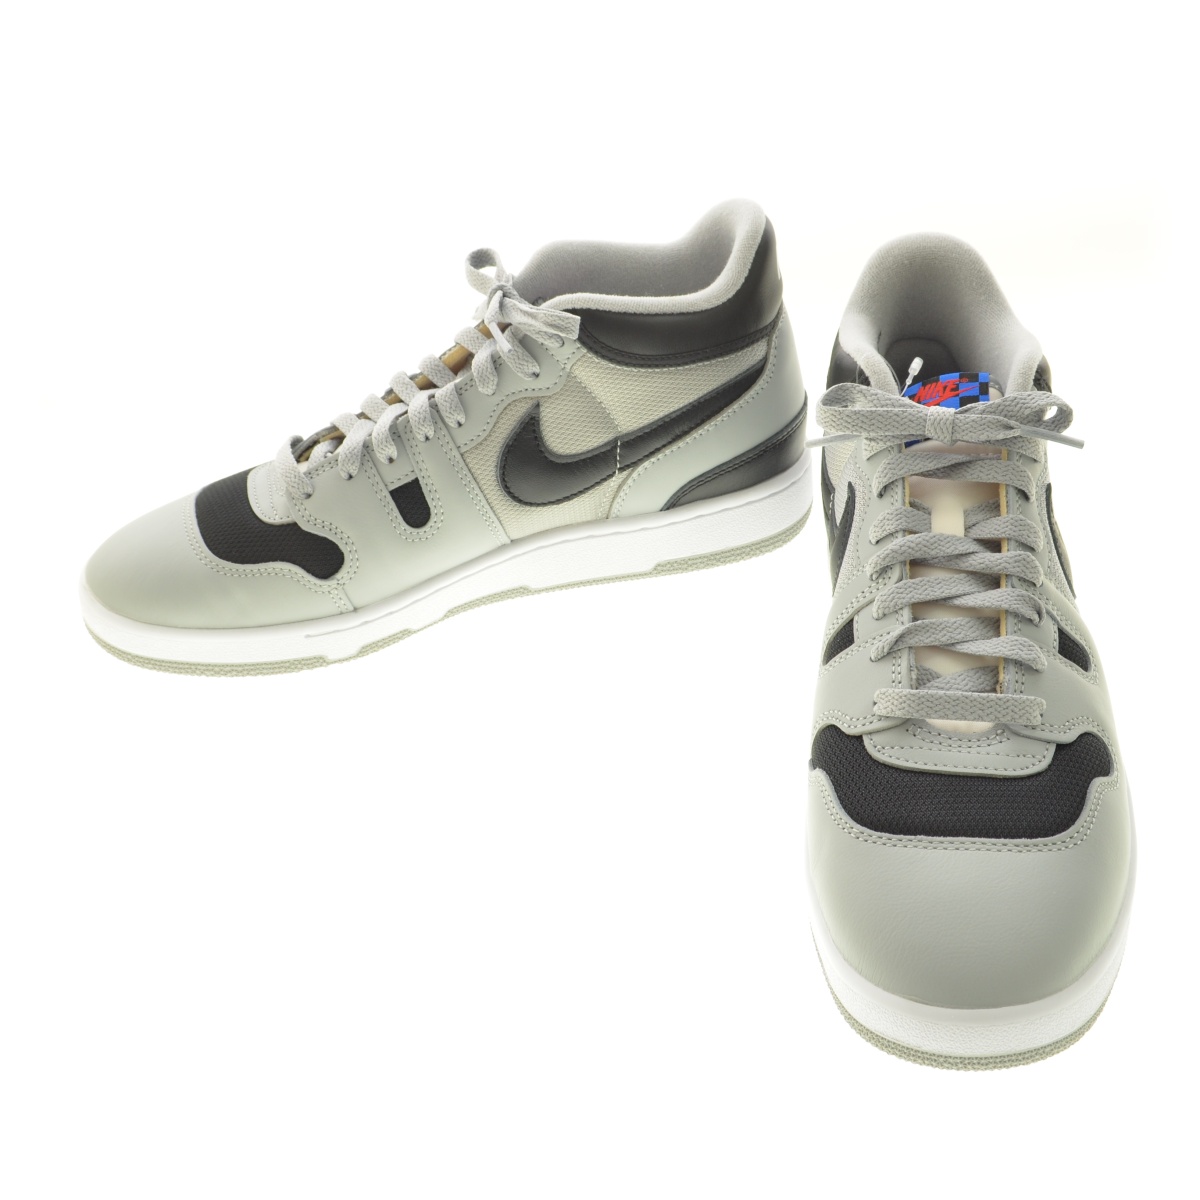 Nike Attack QS SP  ナイキマックアタック